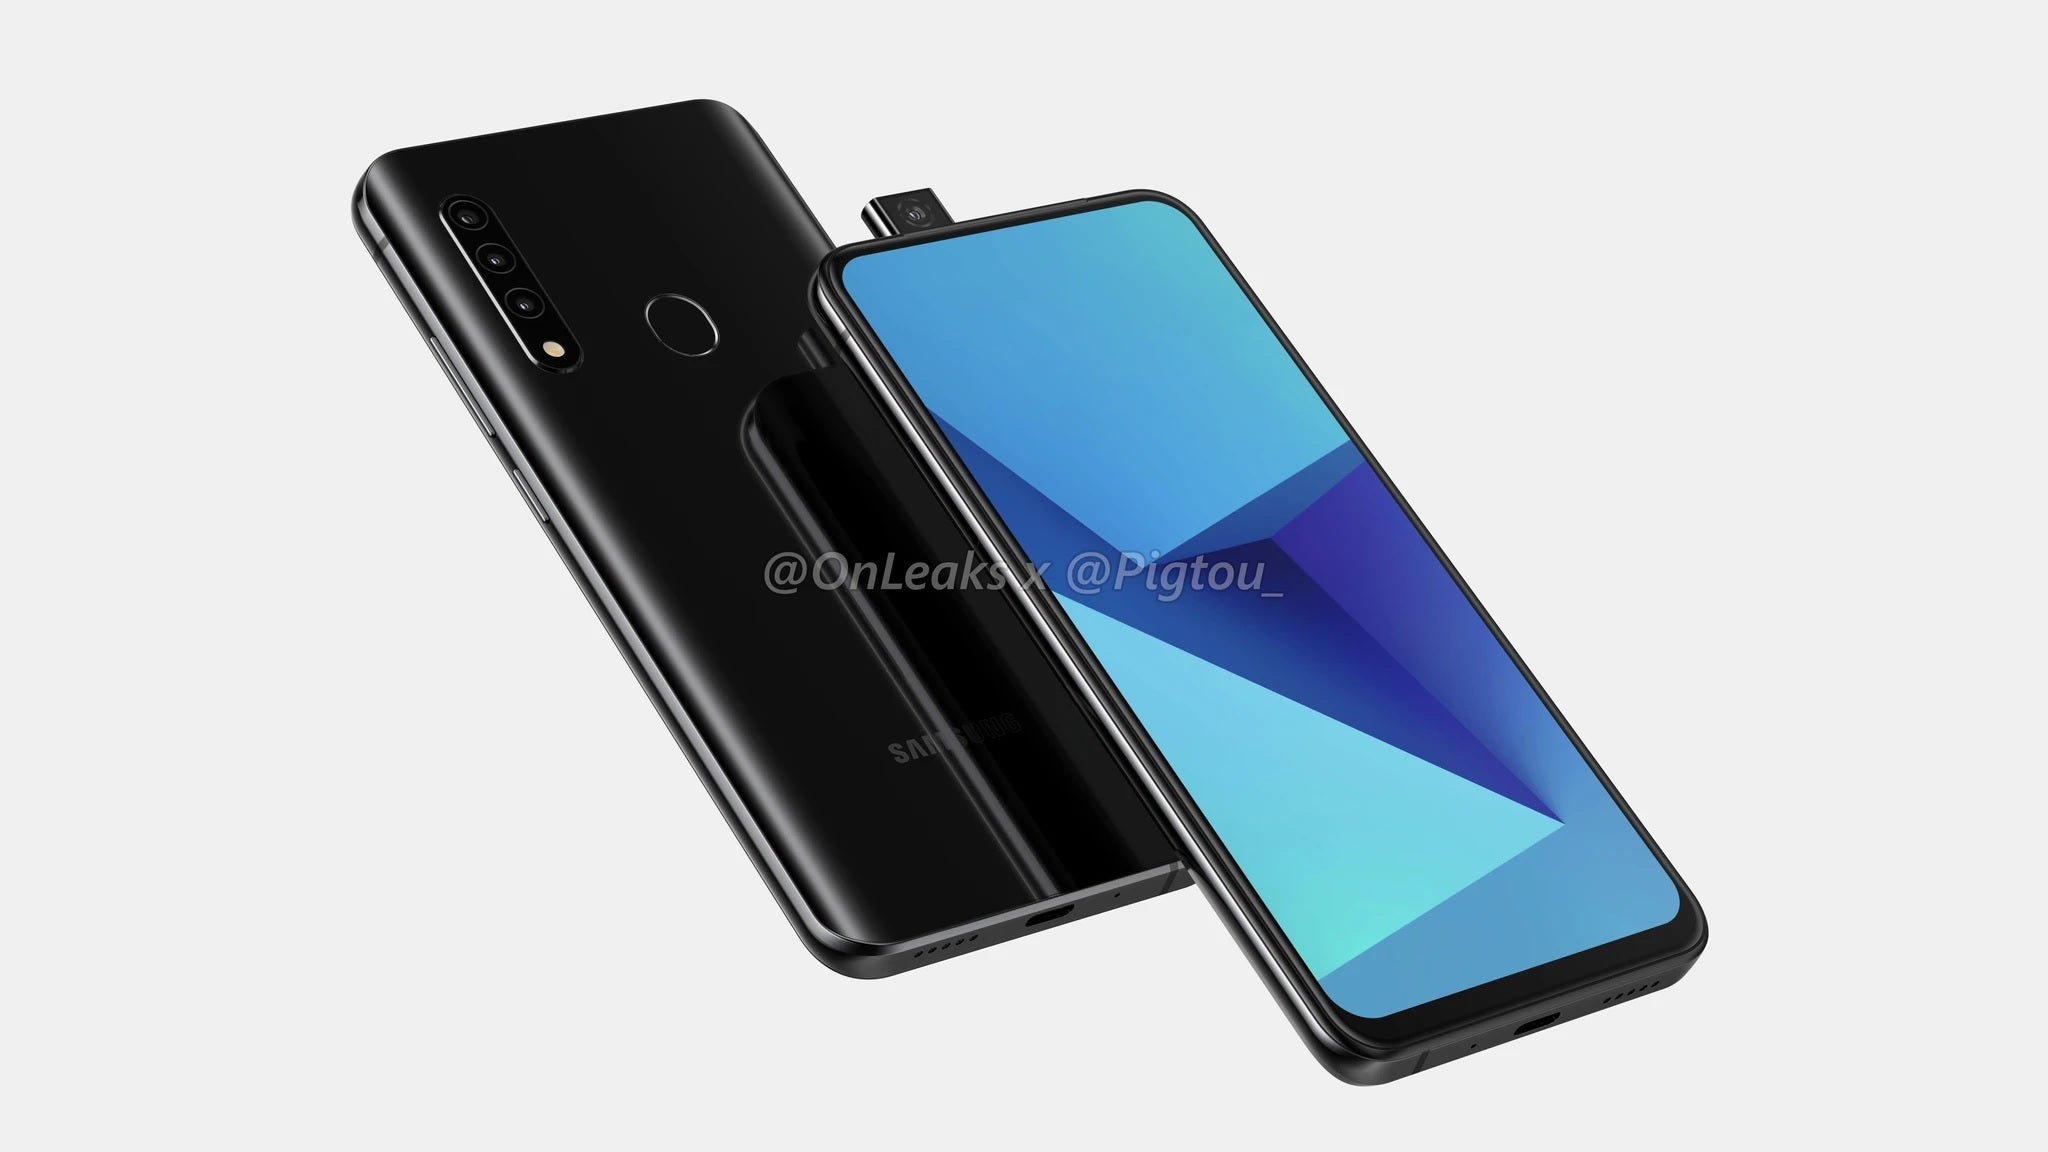 This render allegedly shows a Samsung Galaxy A mid-ranger with a pop-up selfie camera - Renders allegedly reveal Samsung's first phone with a pop-up camera; 5G support not clear